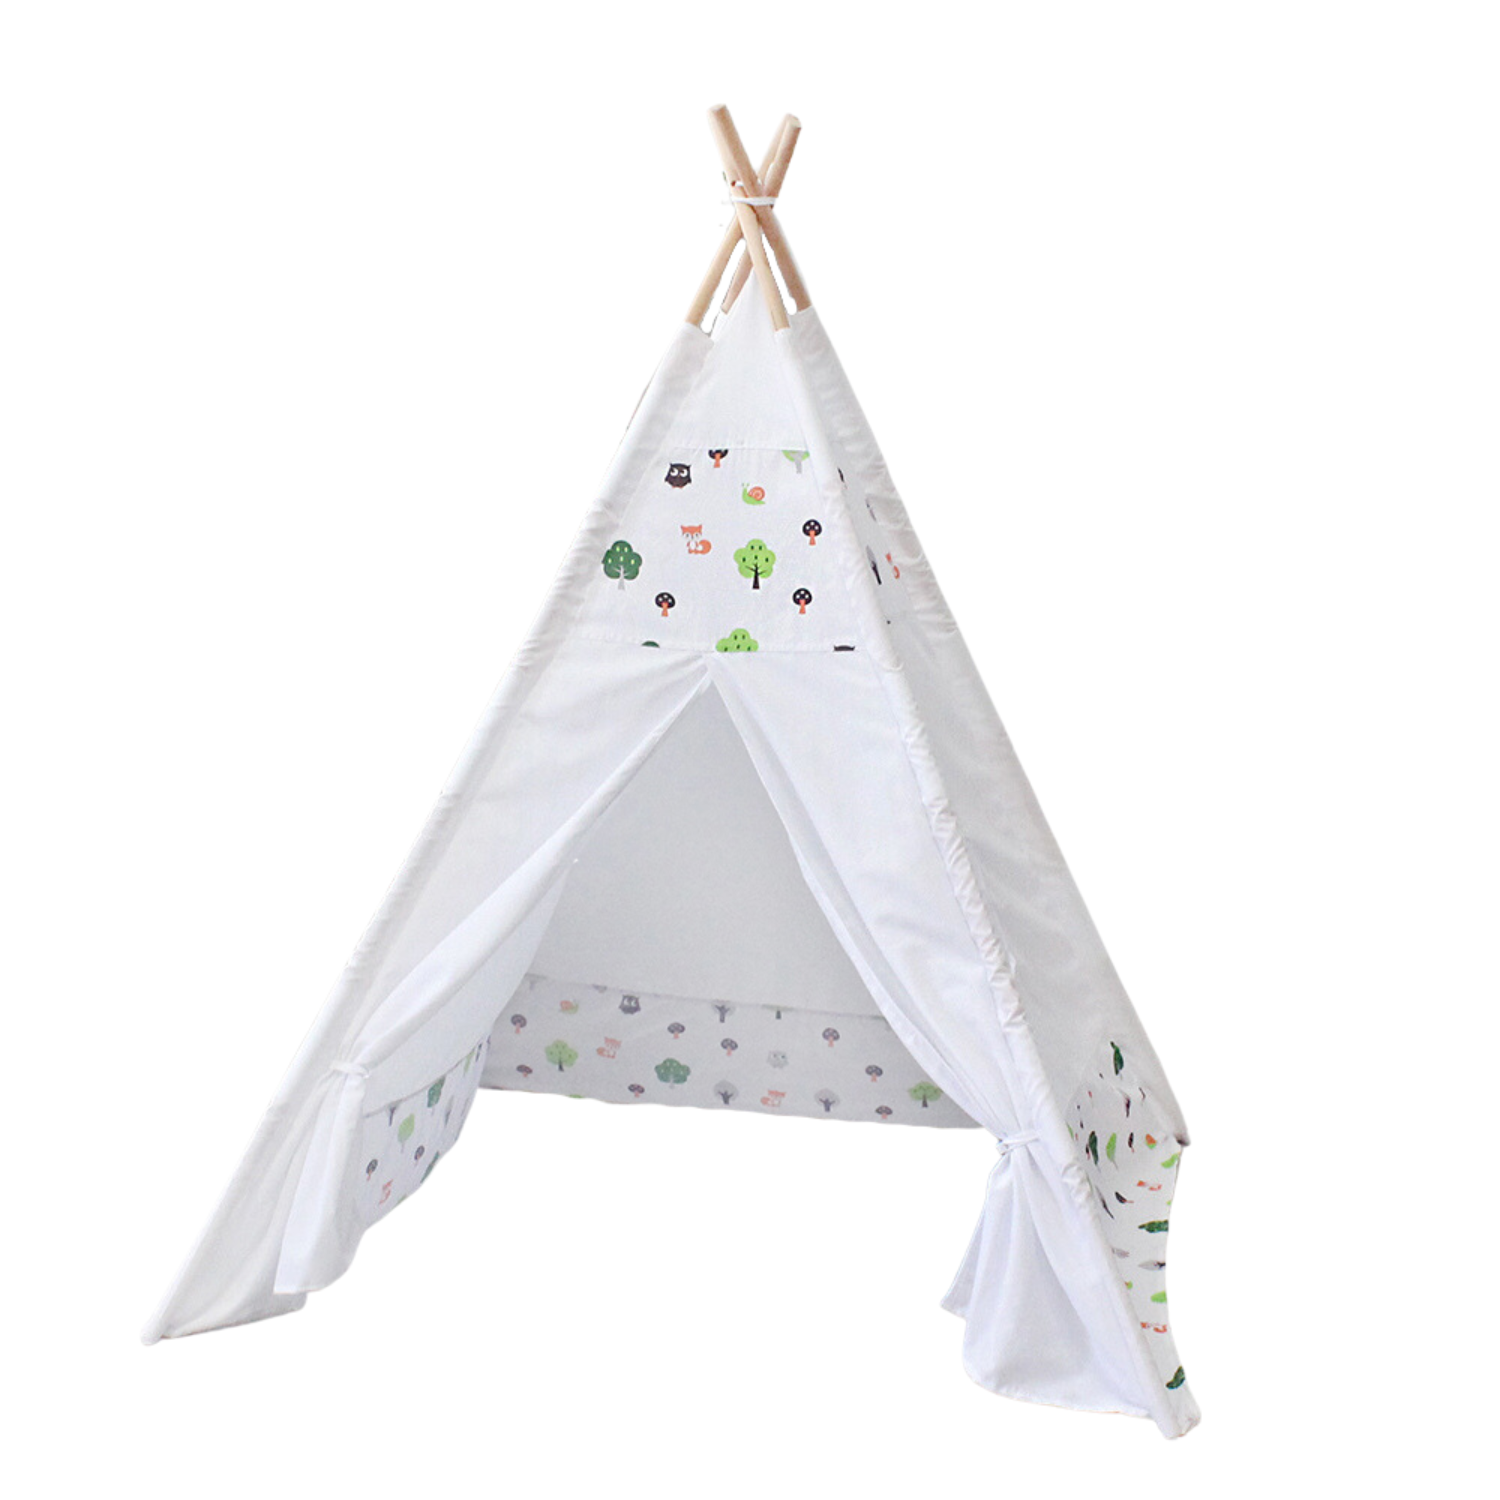 GOMINIMO Kids Teepee Tent with Side Window and Carry Case (White Forest)